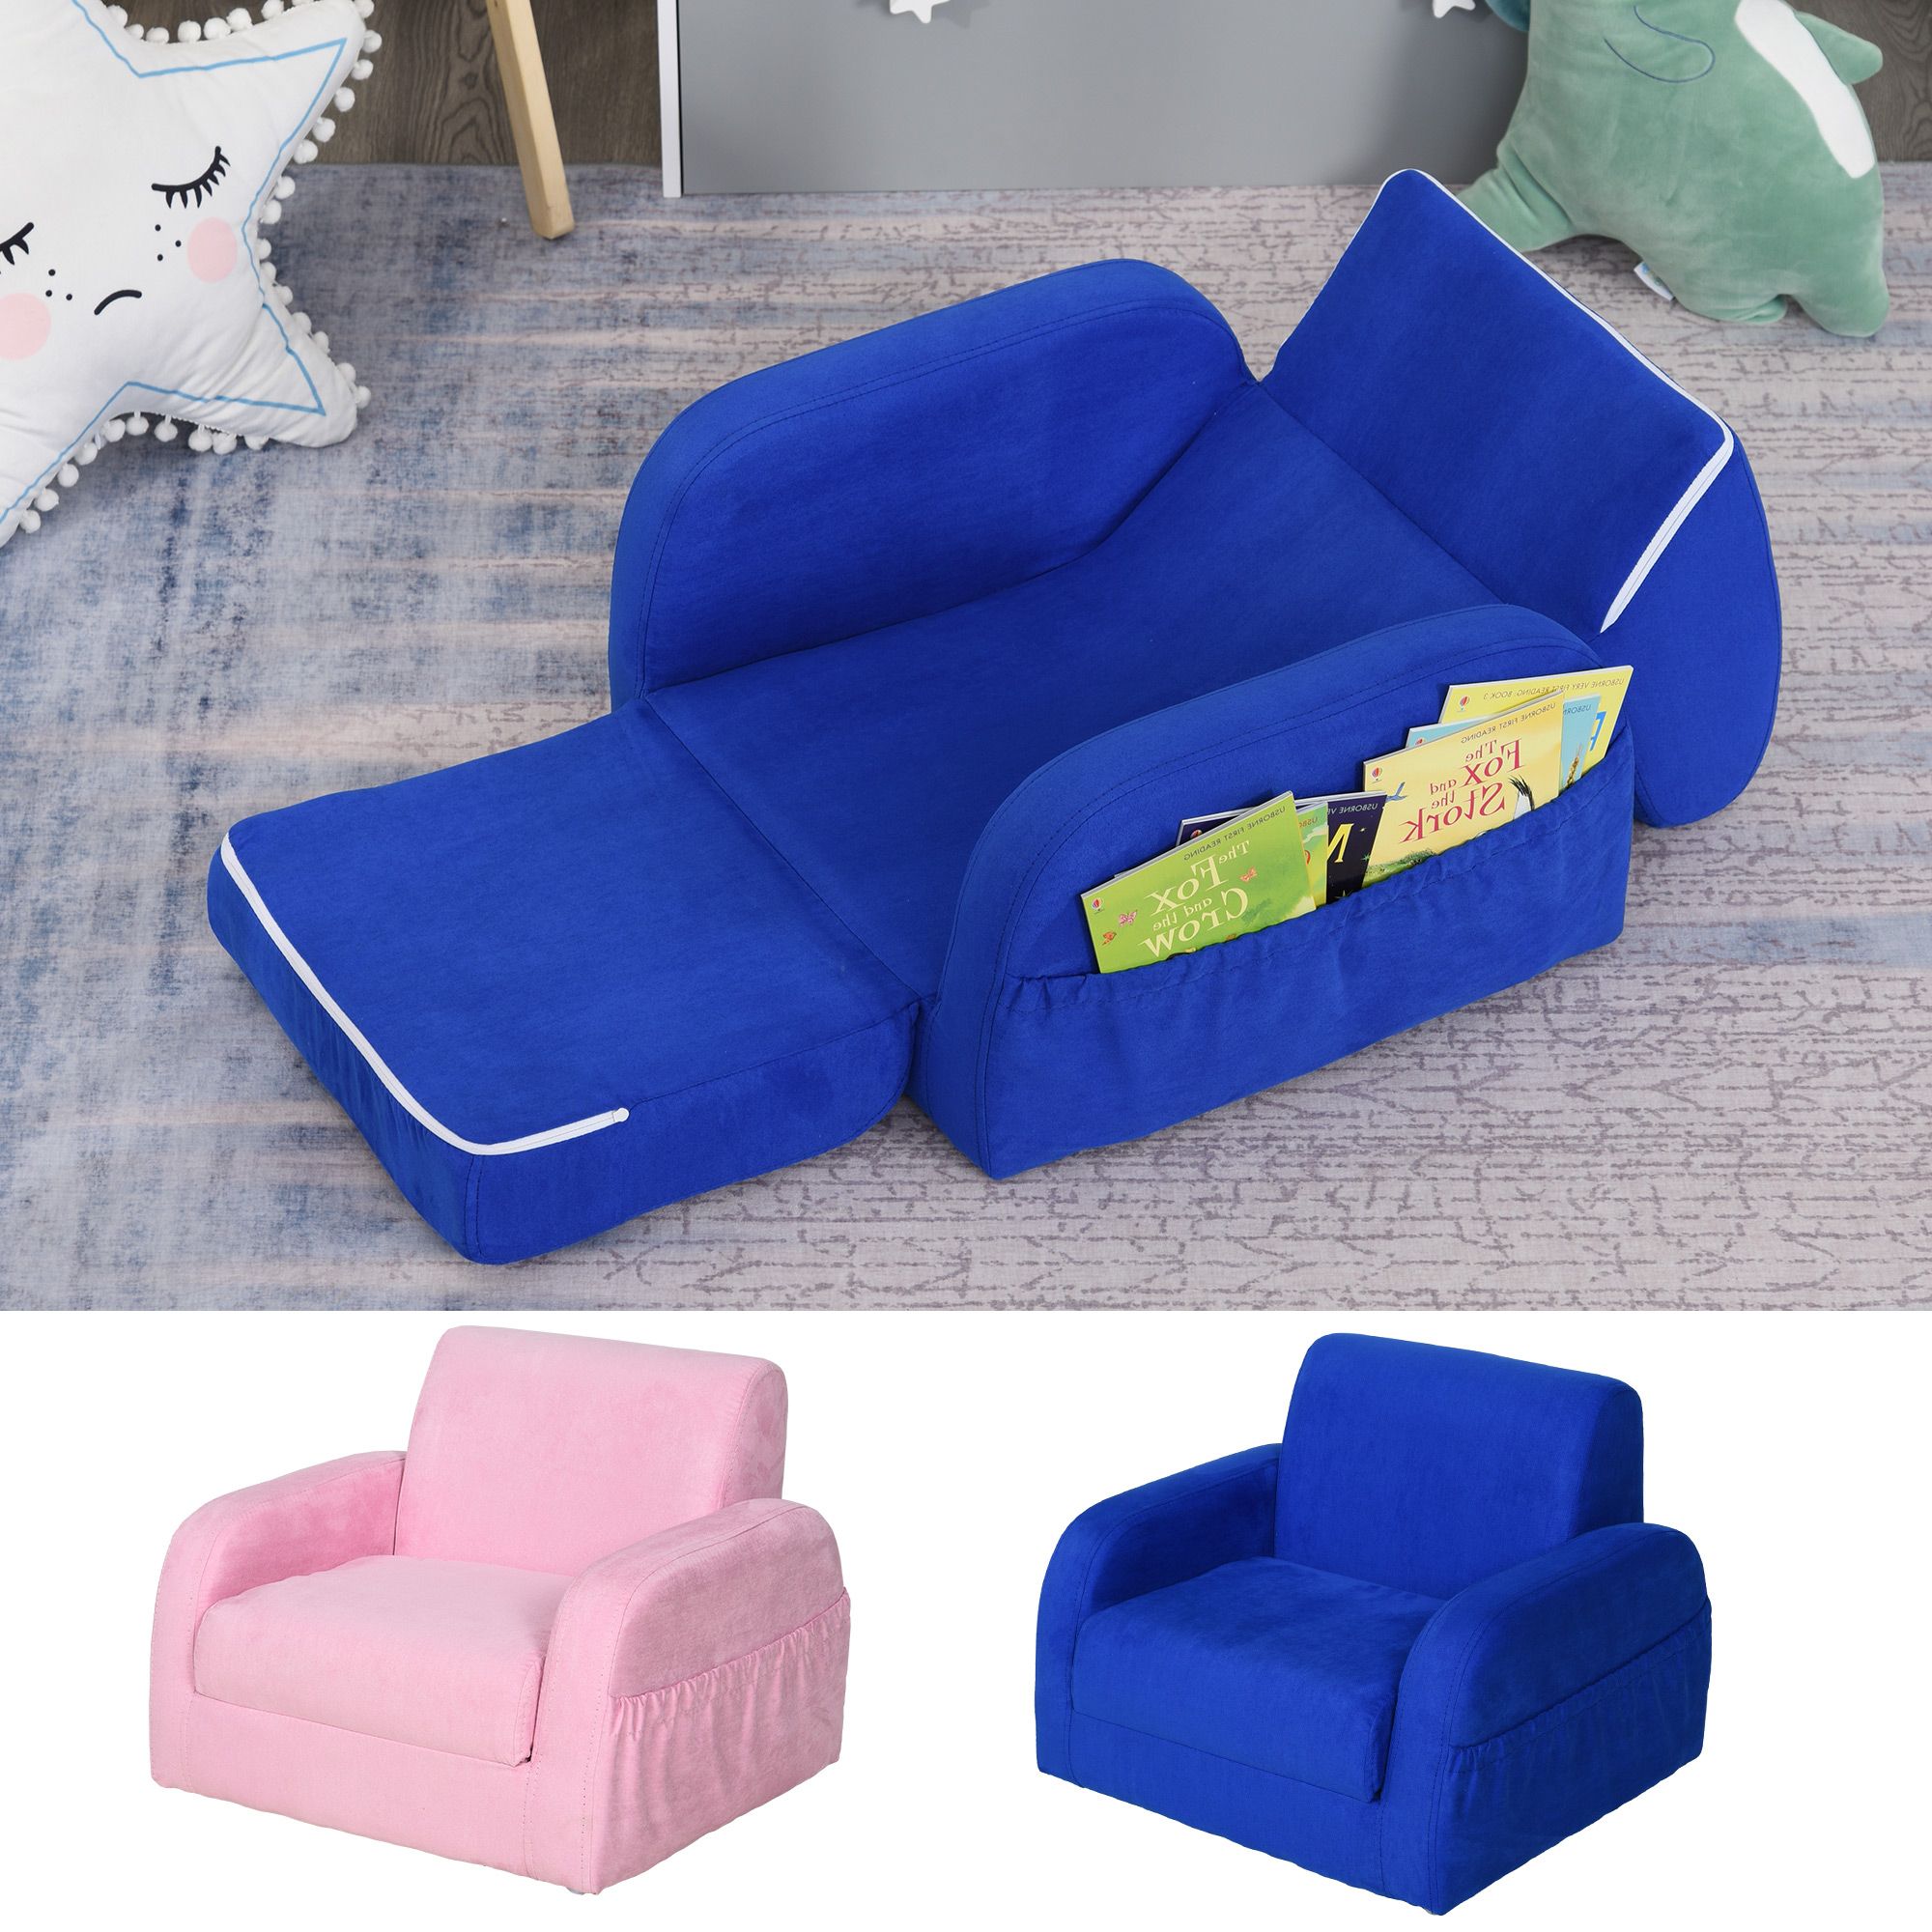 2 In 1 Kids Sofa Armchair Chair Fold Out Flip Open Baby Bed Couch Inside Children&#039;s Sofa Beds (View 2 of 20)